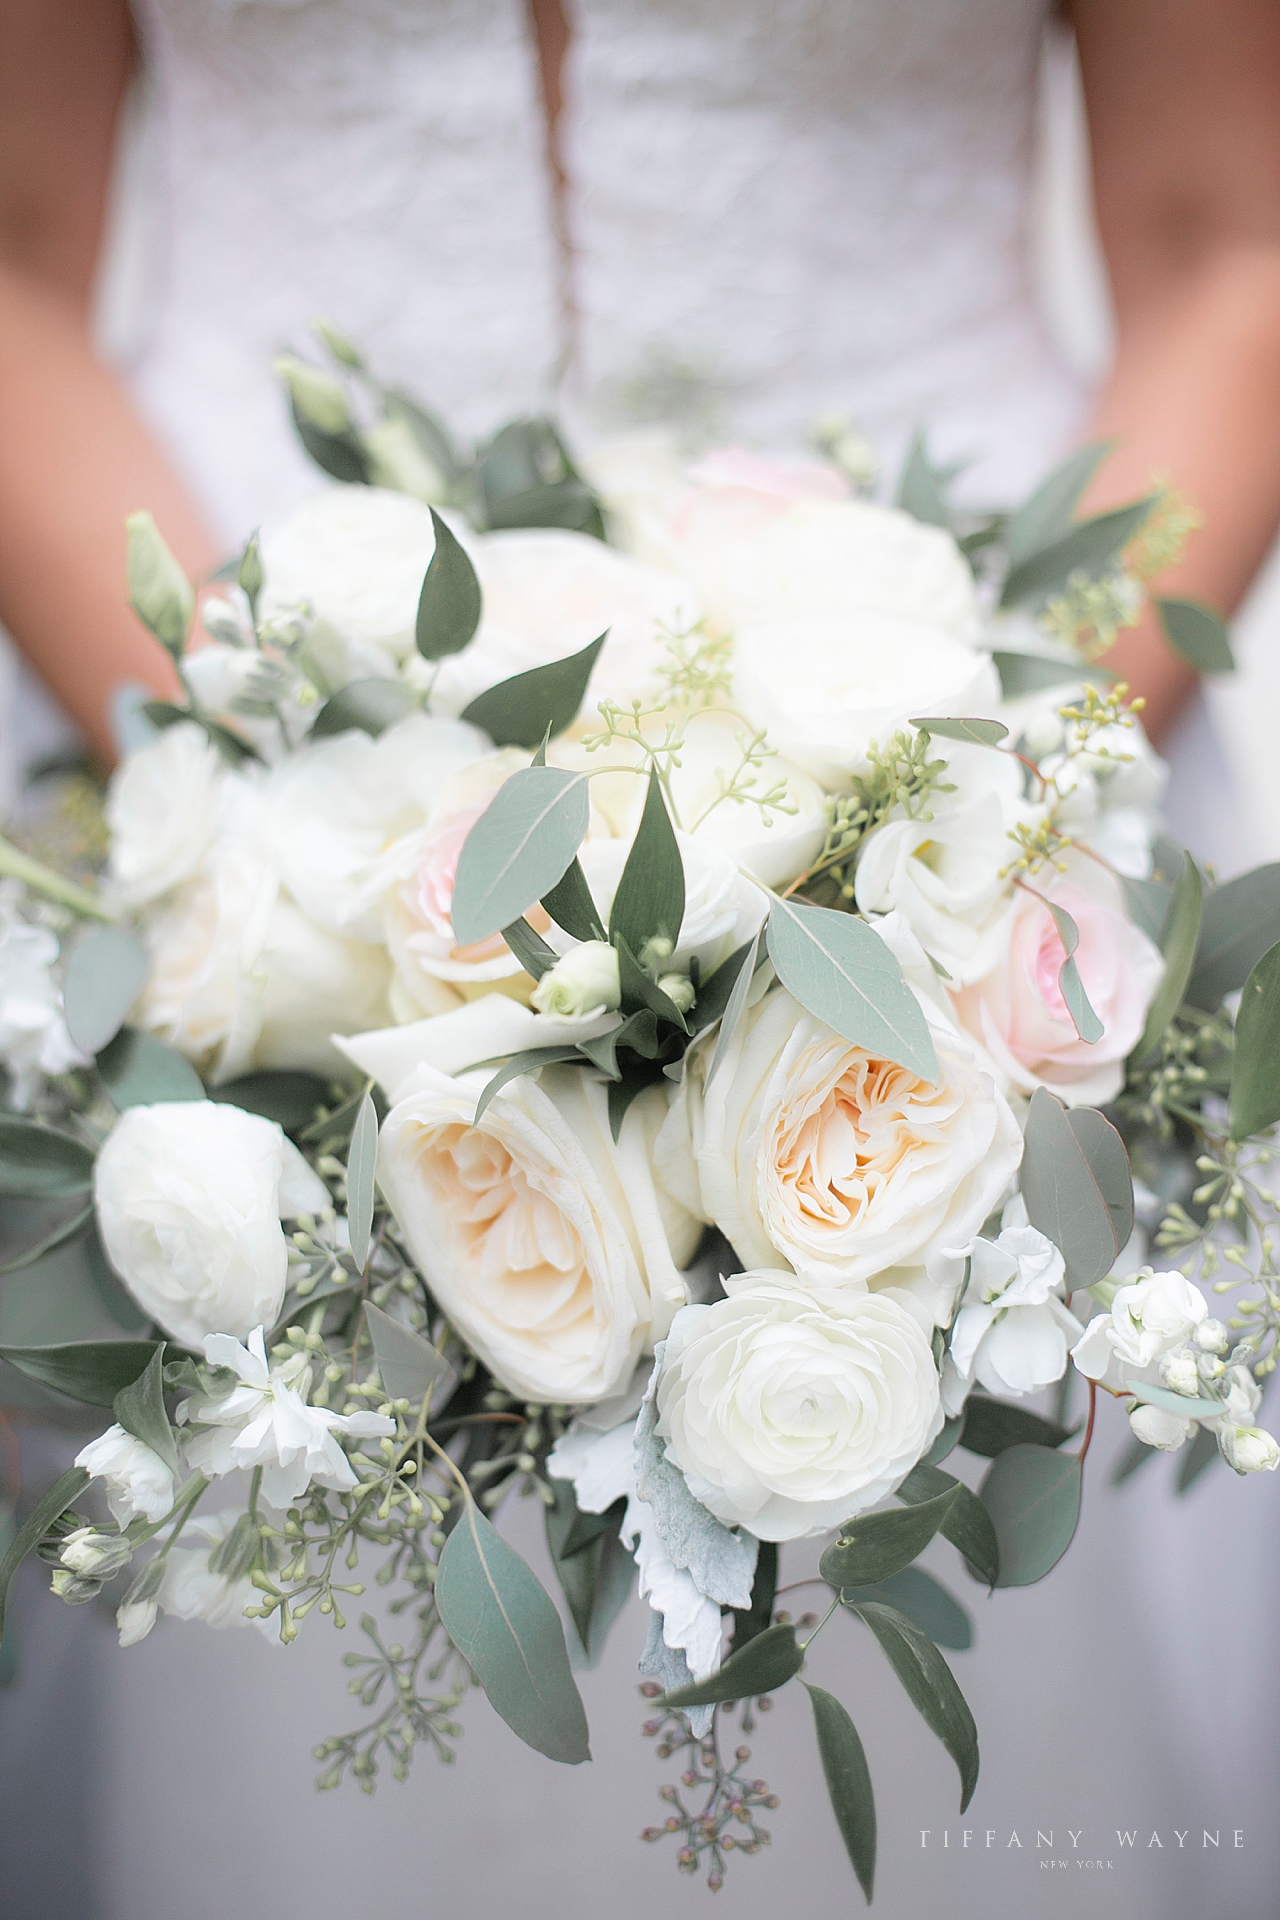 Ivory and blush wedding bouquet by Michele's Florist